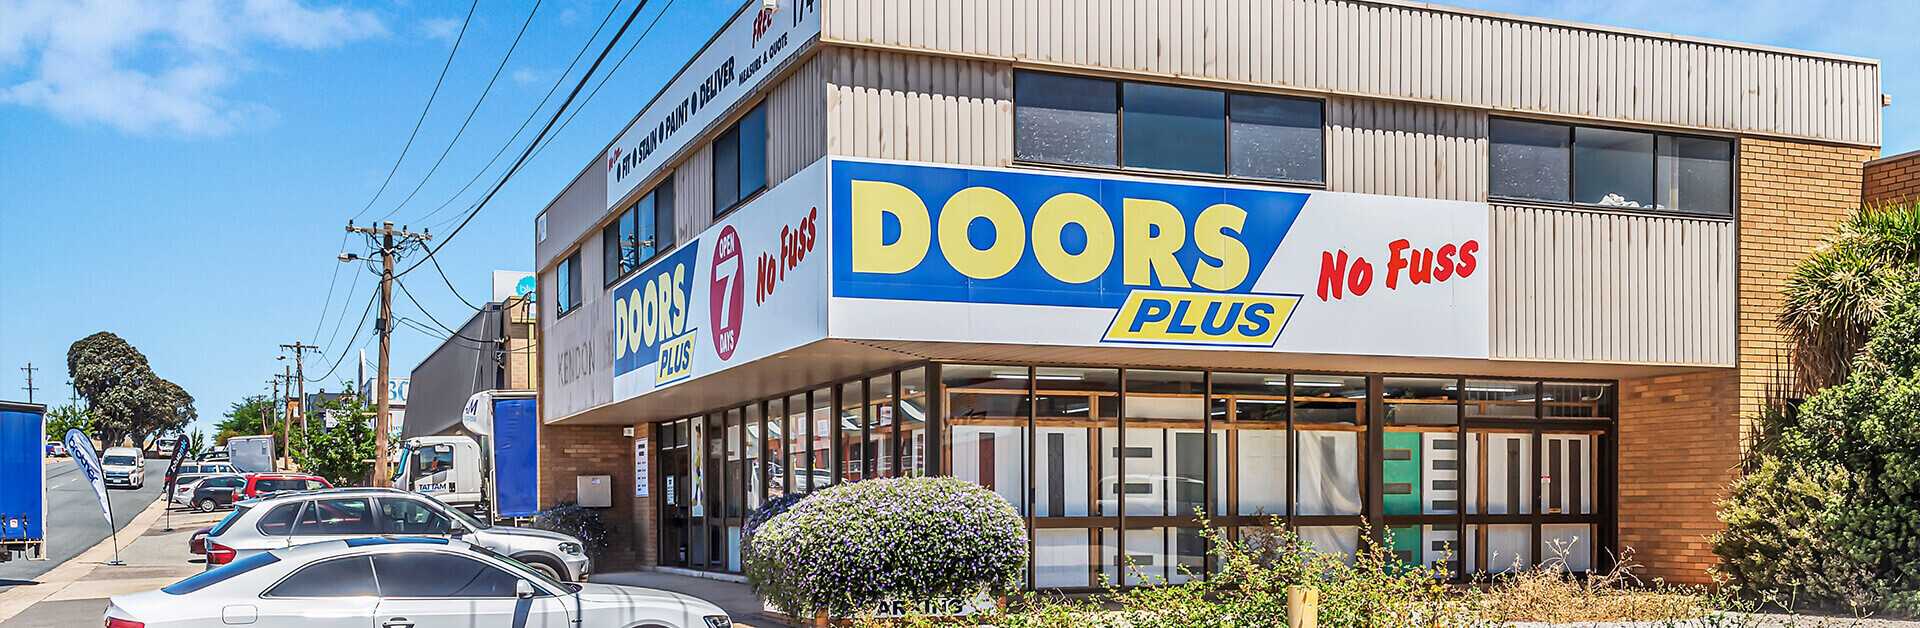 Doors Plus Fyshwick Showroom in Canberra, ACT Outside view